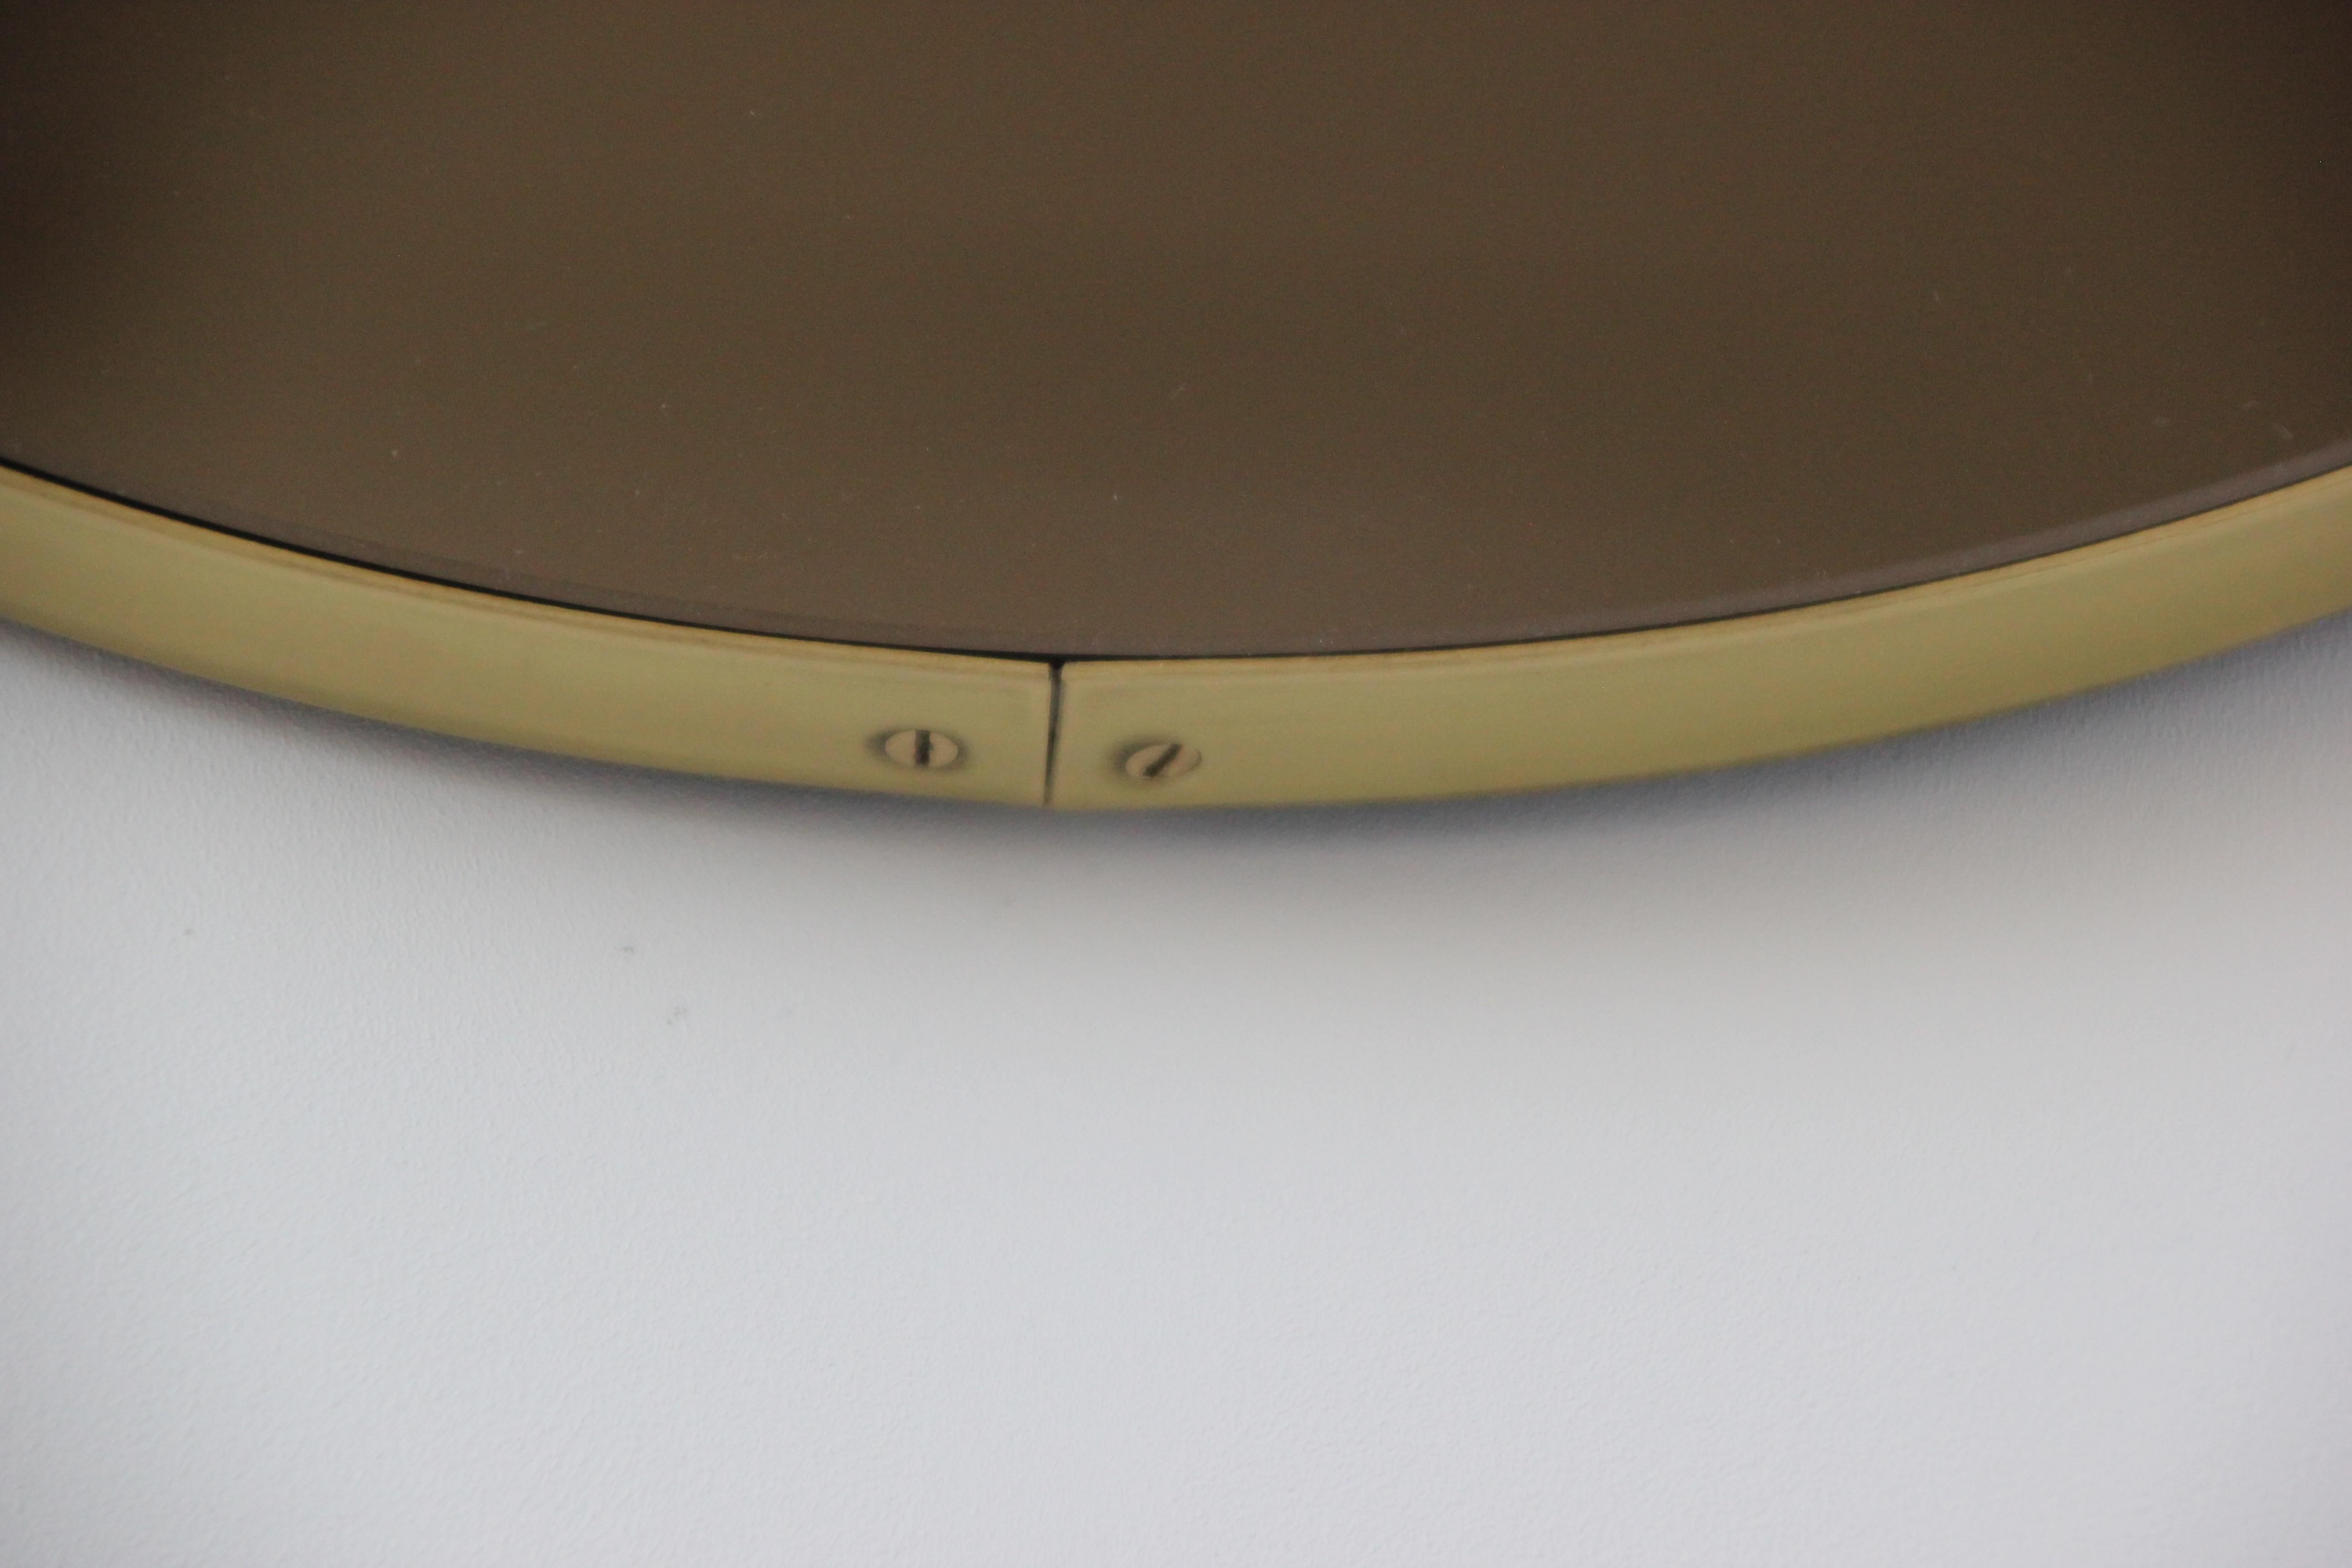 Orbis Bronze Tinted Contemporary Round Mirror, Brass Frame, Medium In New Condition For Sale In London, GB